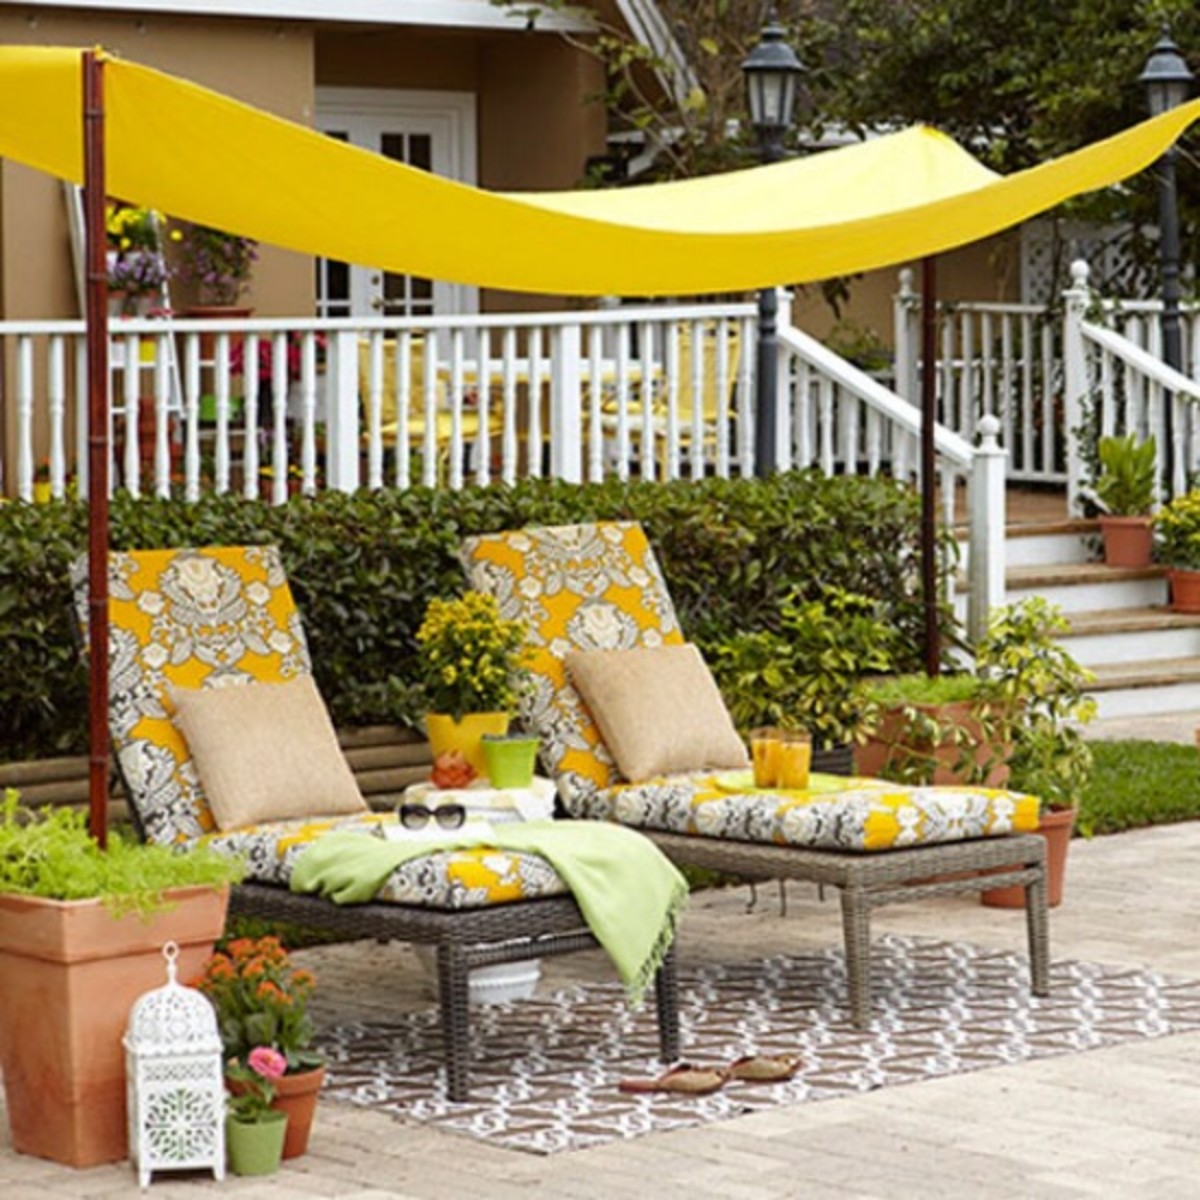 9 Easy DIY Ideas to Chic Things Up In Your Backyard